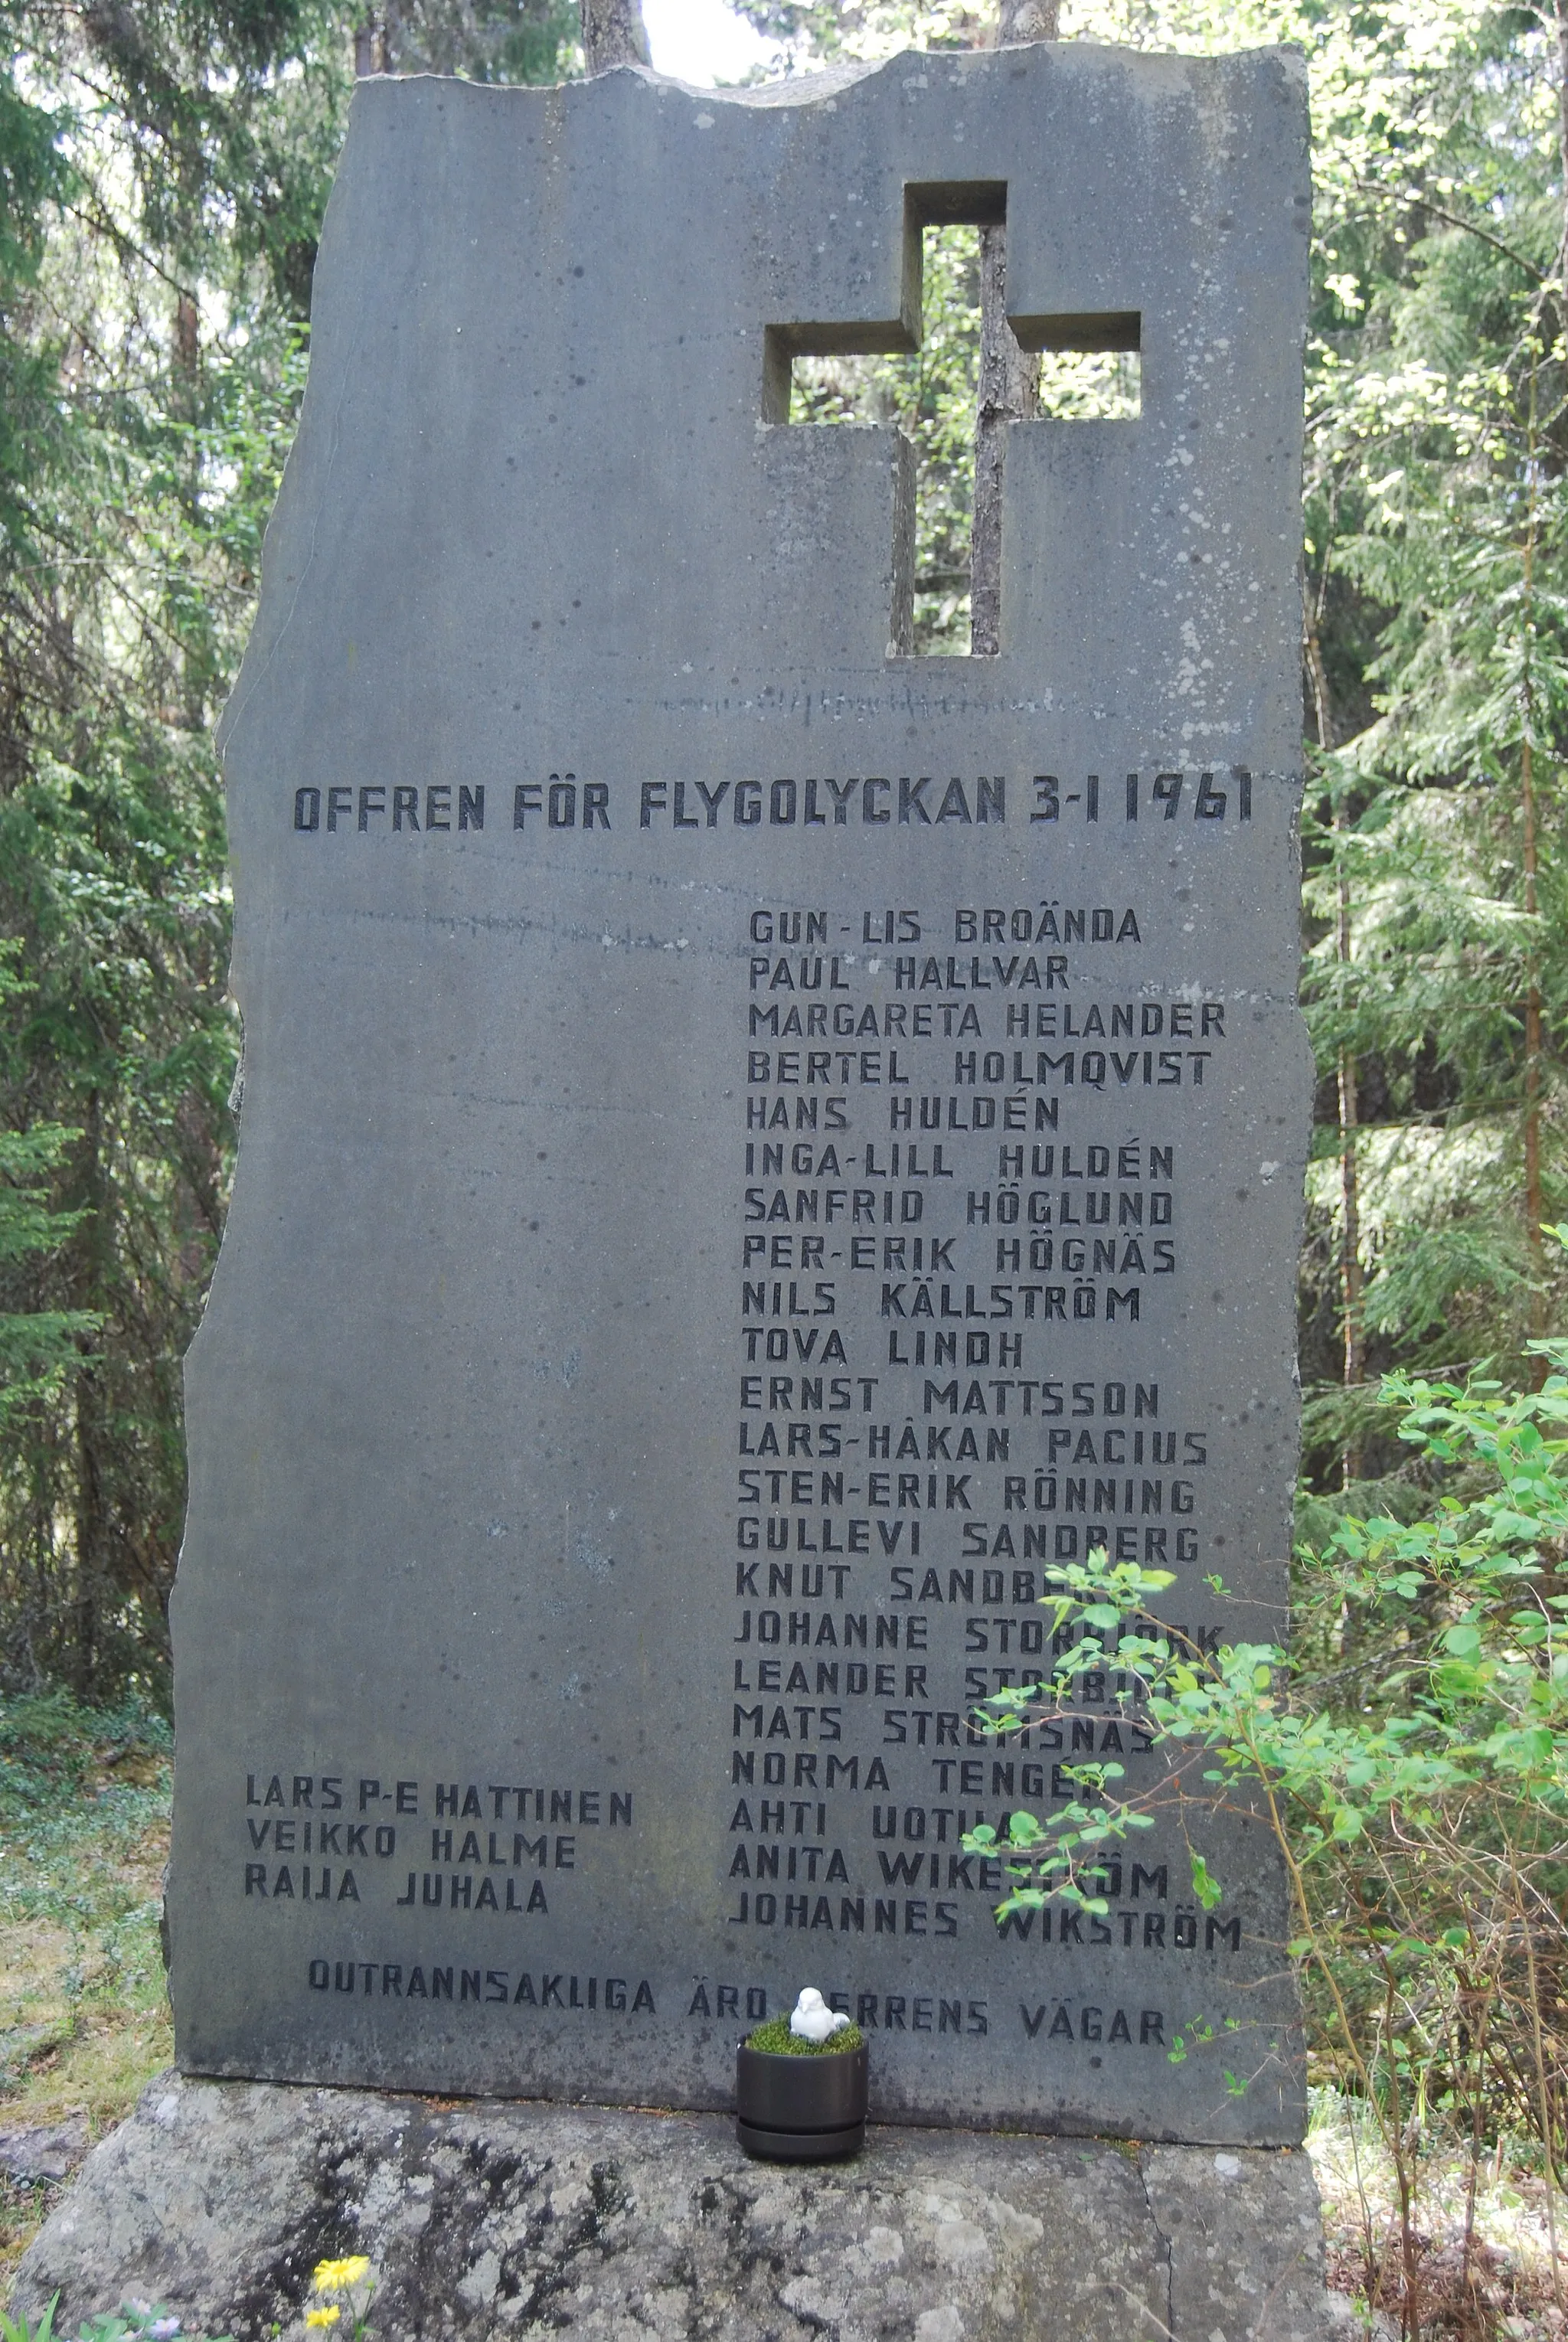 Photo showing: Memorial of the Koivulahti air disaster in Kvevlax, Korsholm, Finland. The accident occured on January 3, 1961.